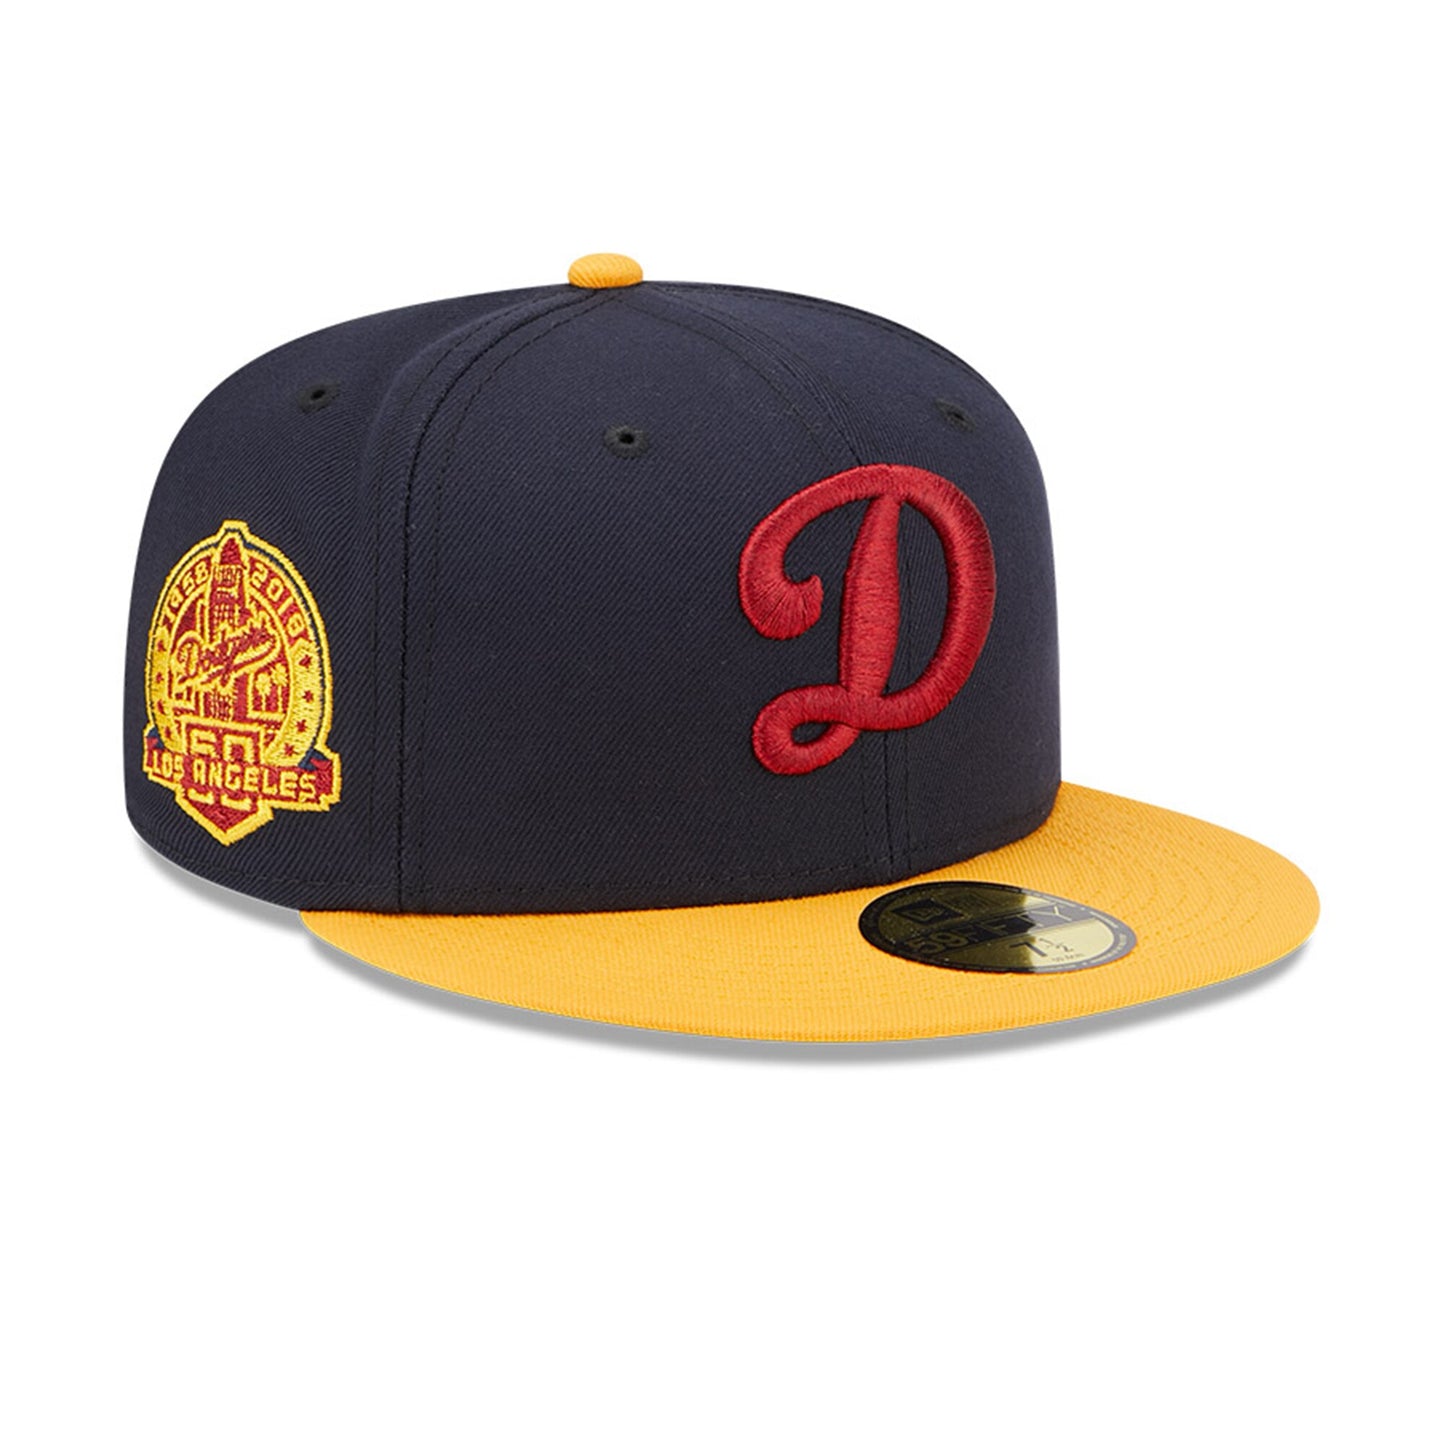 Los Angeles Dodgers New Era 60th Anniversary Primary Logo 59FIFTY Fitted Hat - Navy/Gold